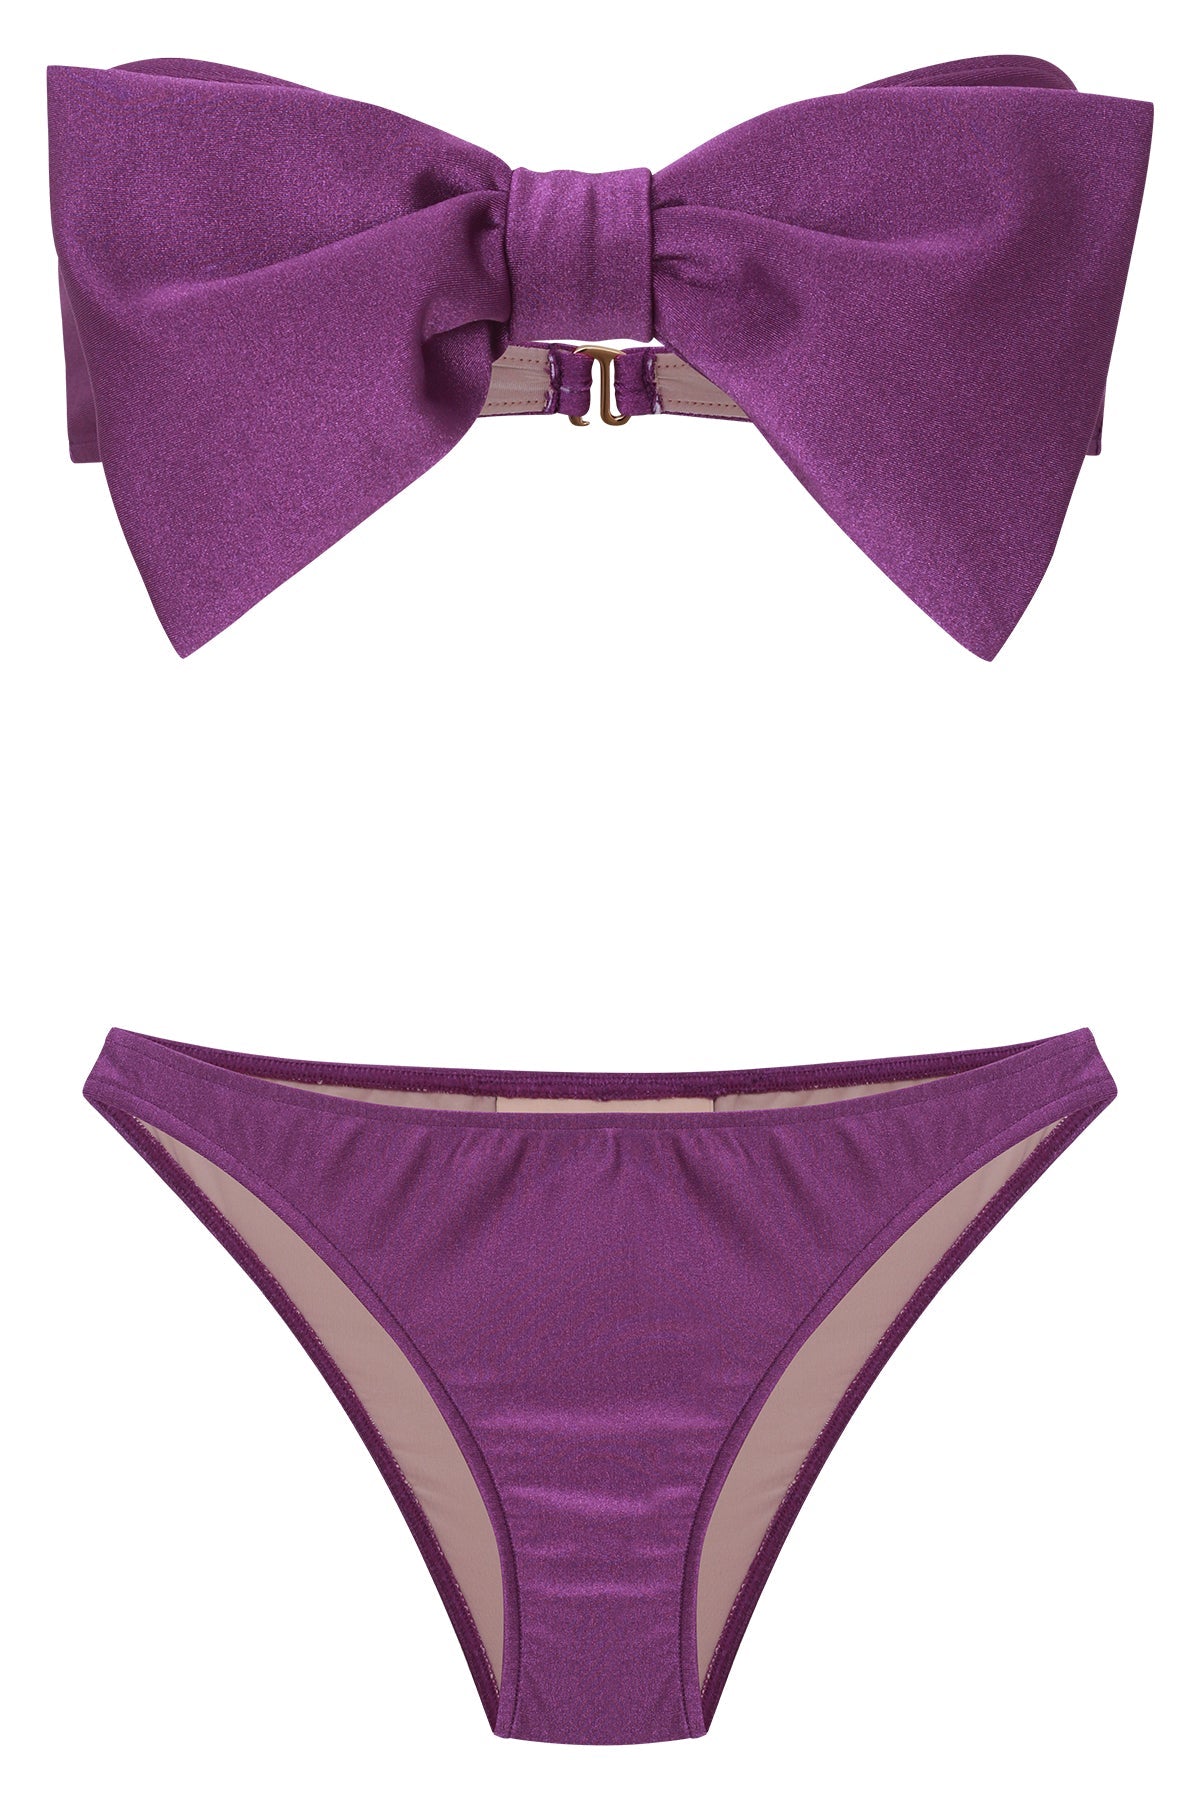 Bain Couture Strapless Bikini With Bow Product